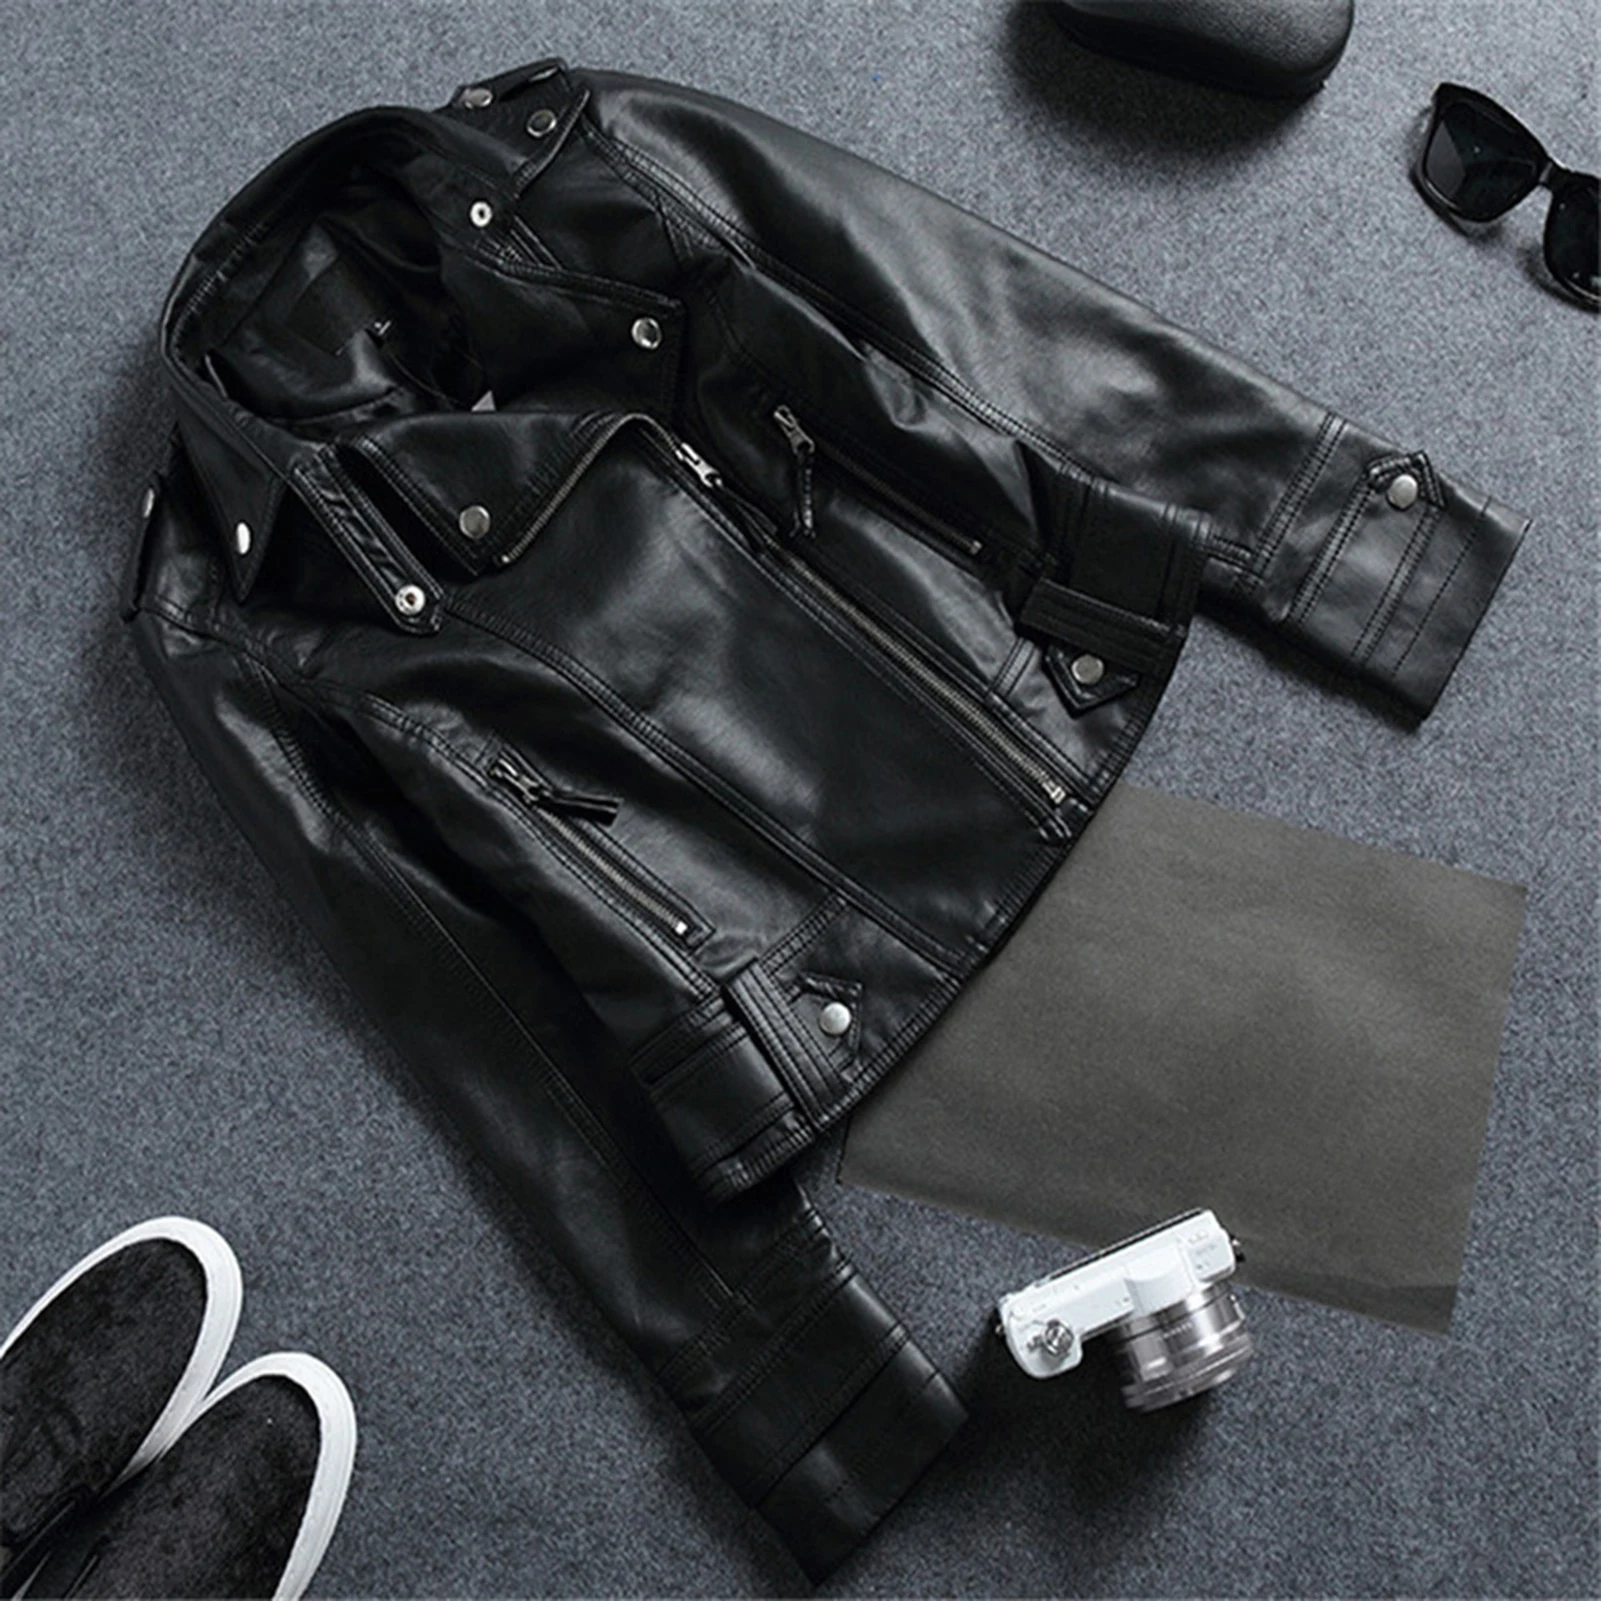 Female's Biker Lapel Jacket Classic Faux Leather Biker Jacket For Daily Going Out Or At Home